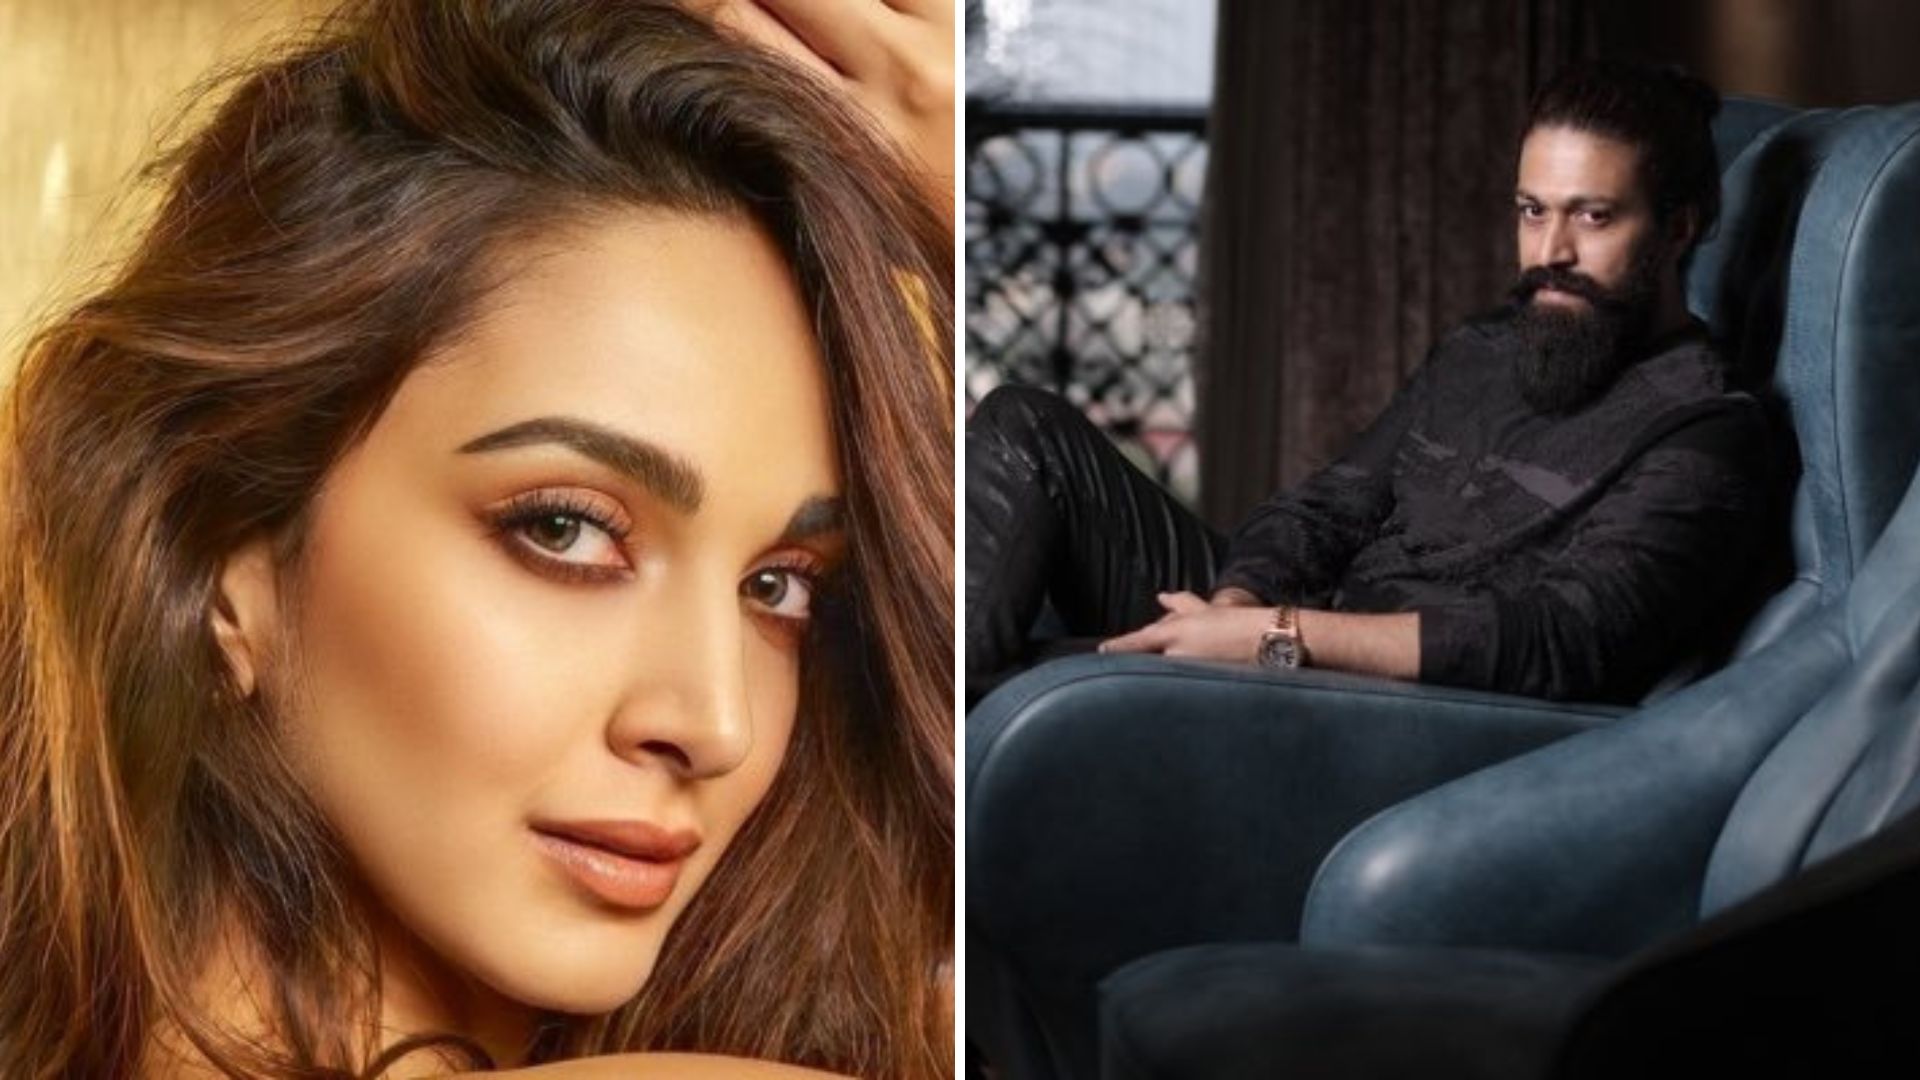 Kiara Advani has officially been announced as the female protagonist in Yash's upcoming film Toxic